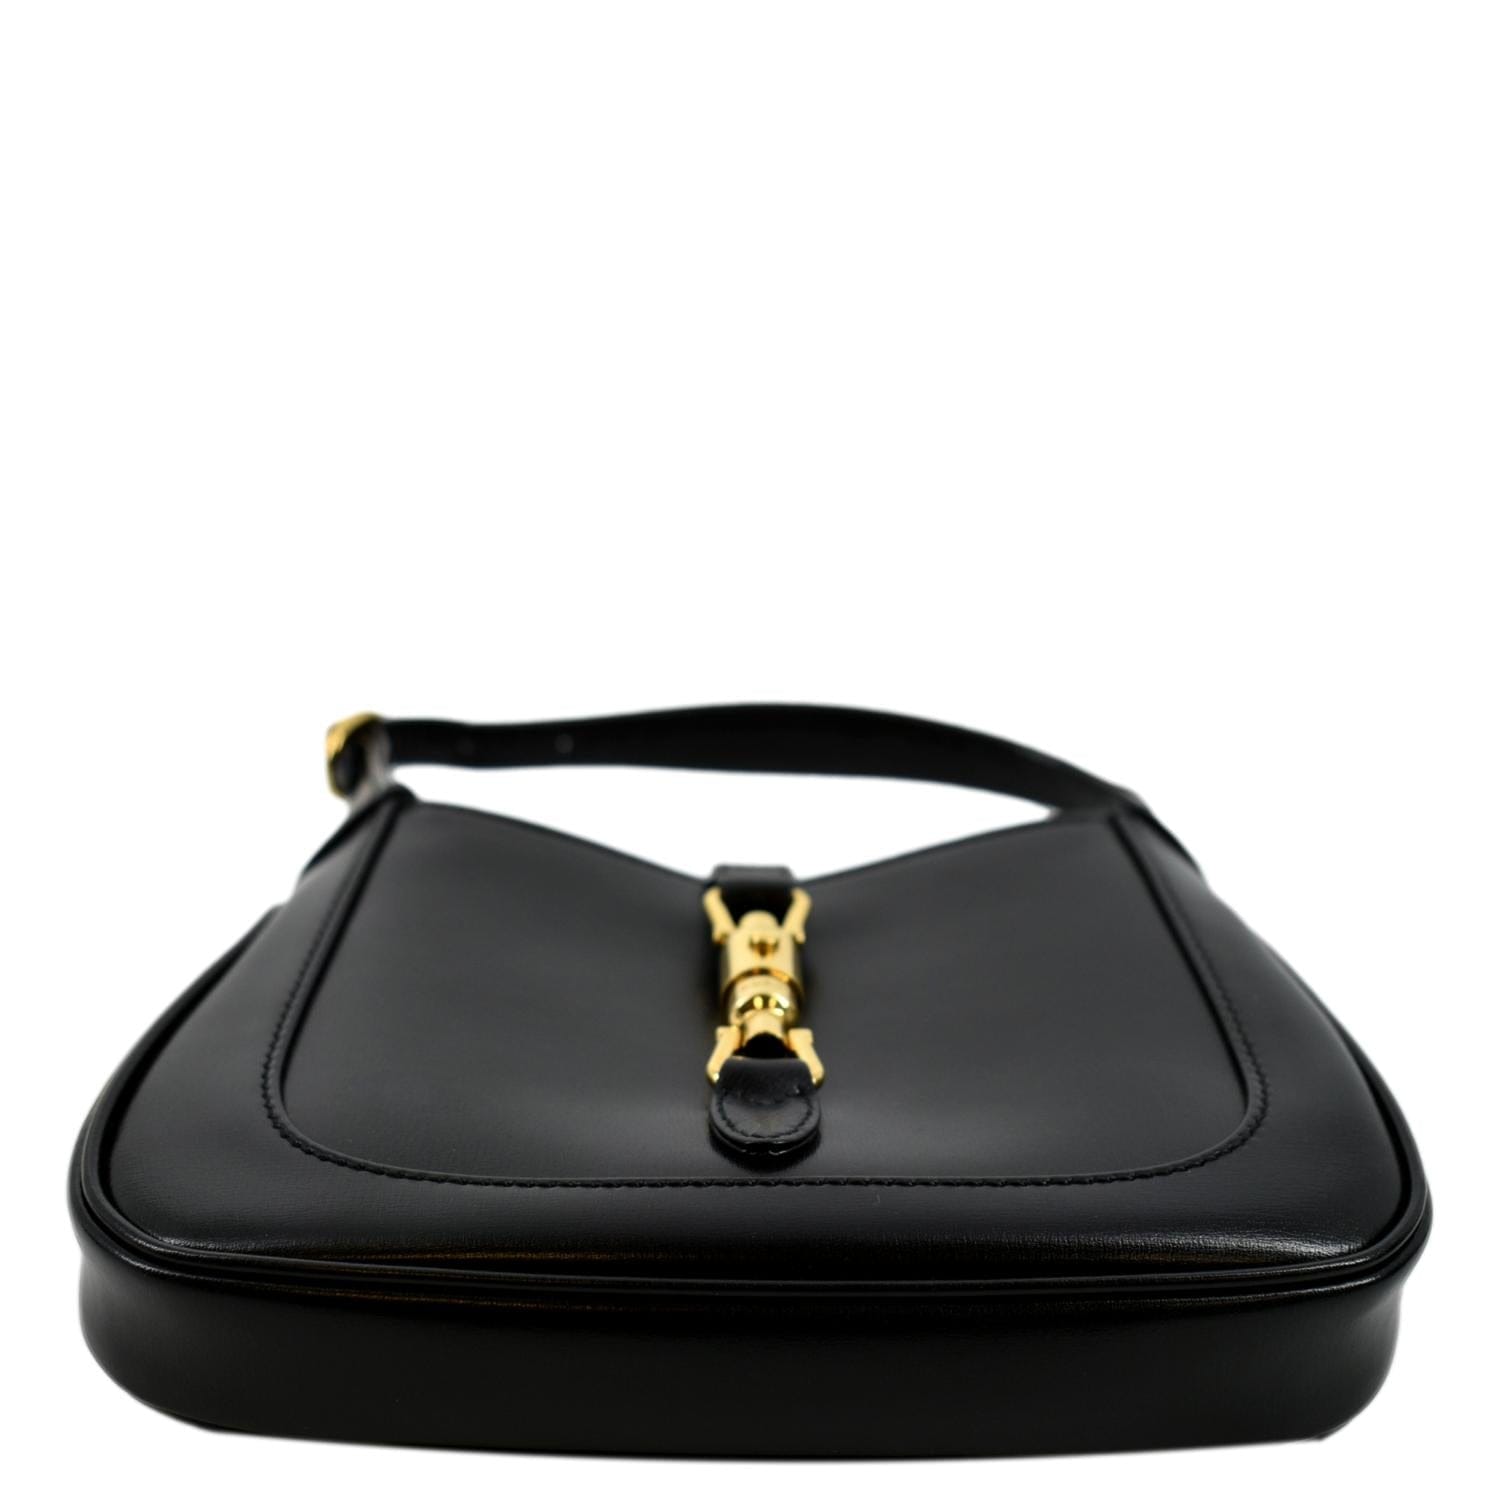 Jackie 1961 Mini Patent Leather Shoulder Bag in White - Gucci